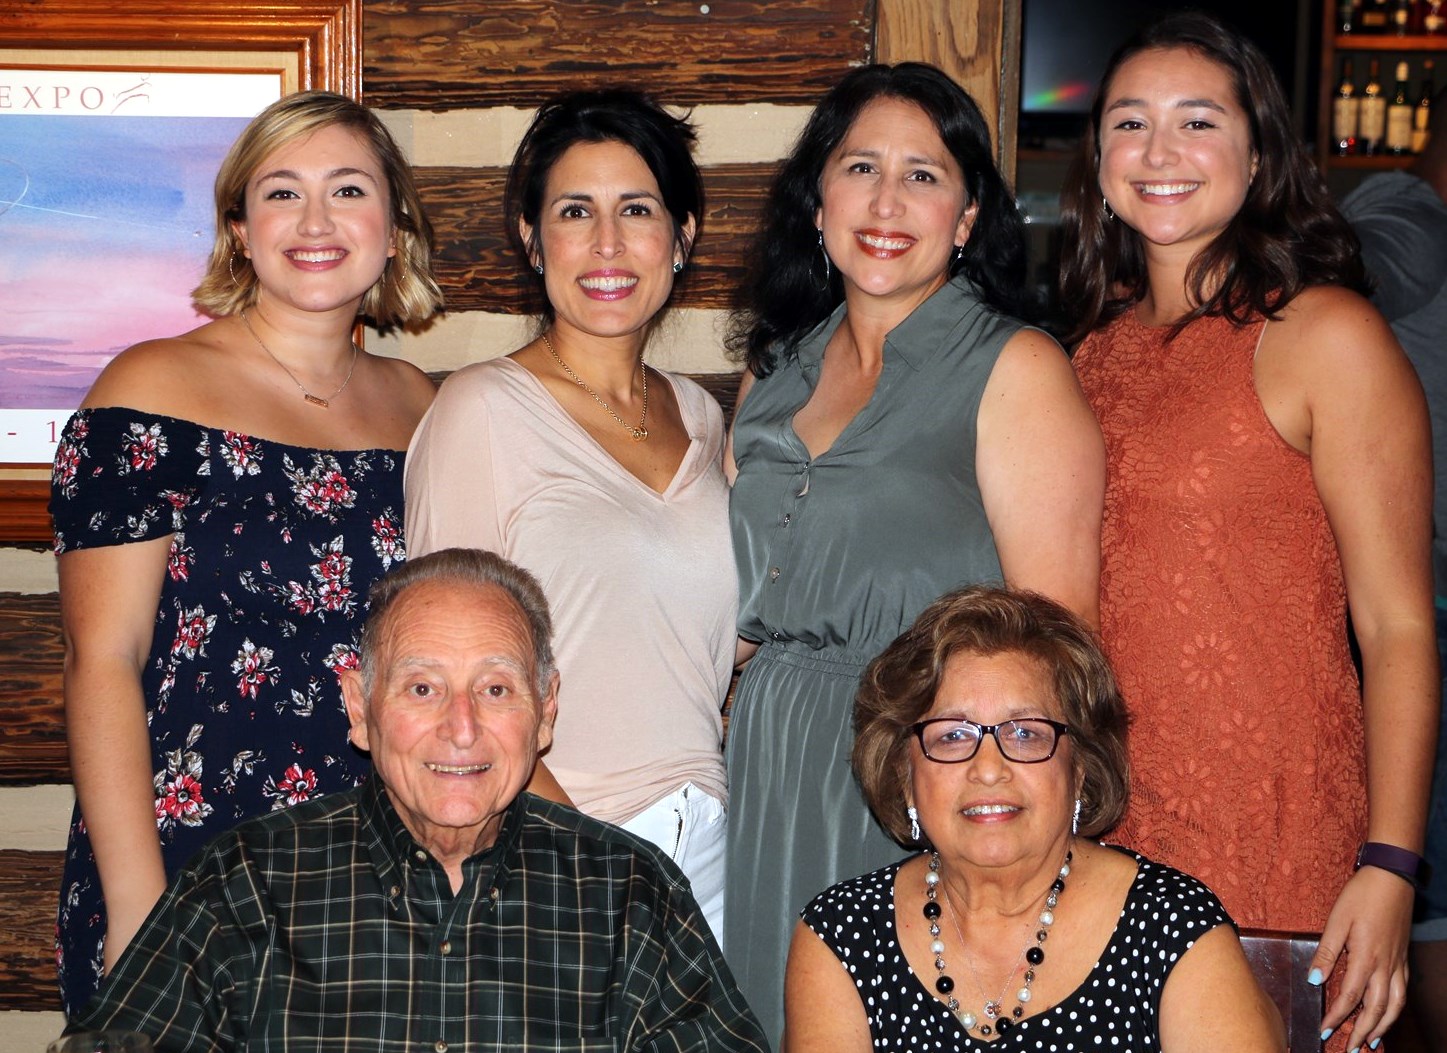 Obituary of George N Zuckero - 08/27/2019 - From the Family